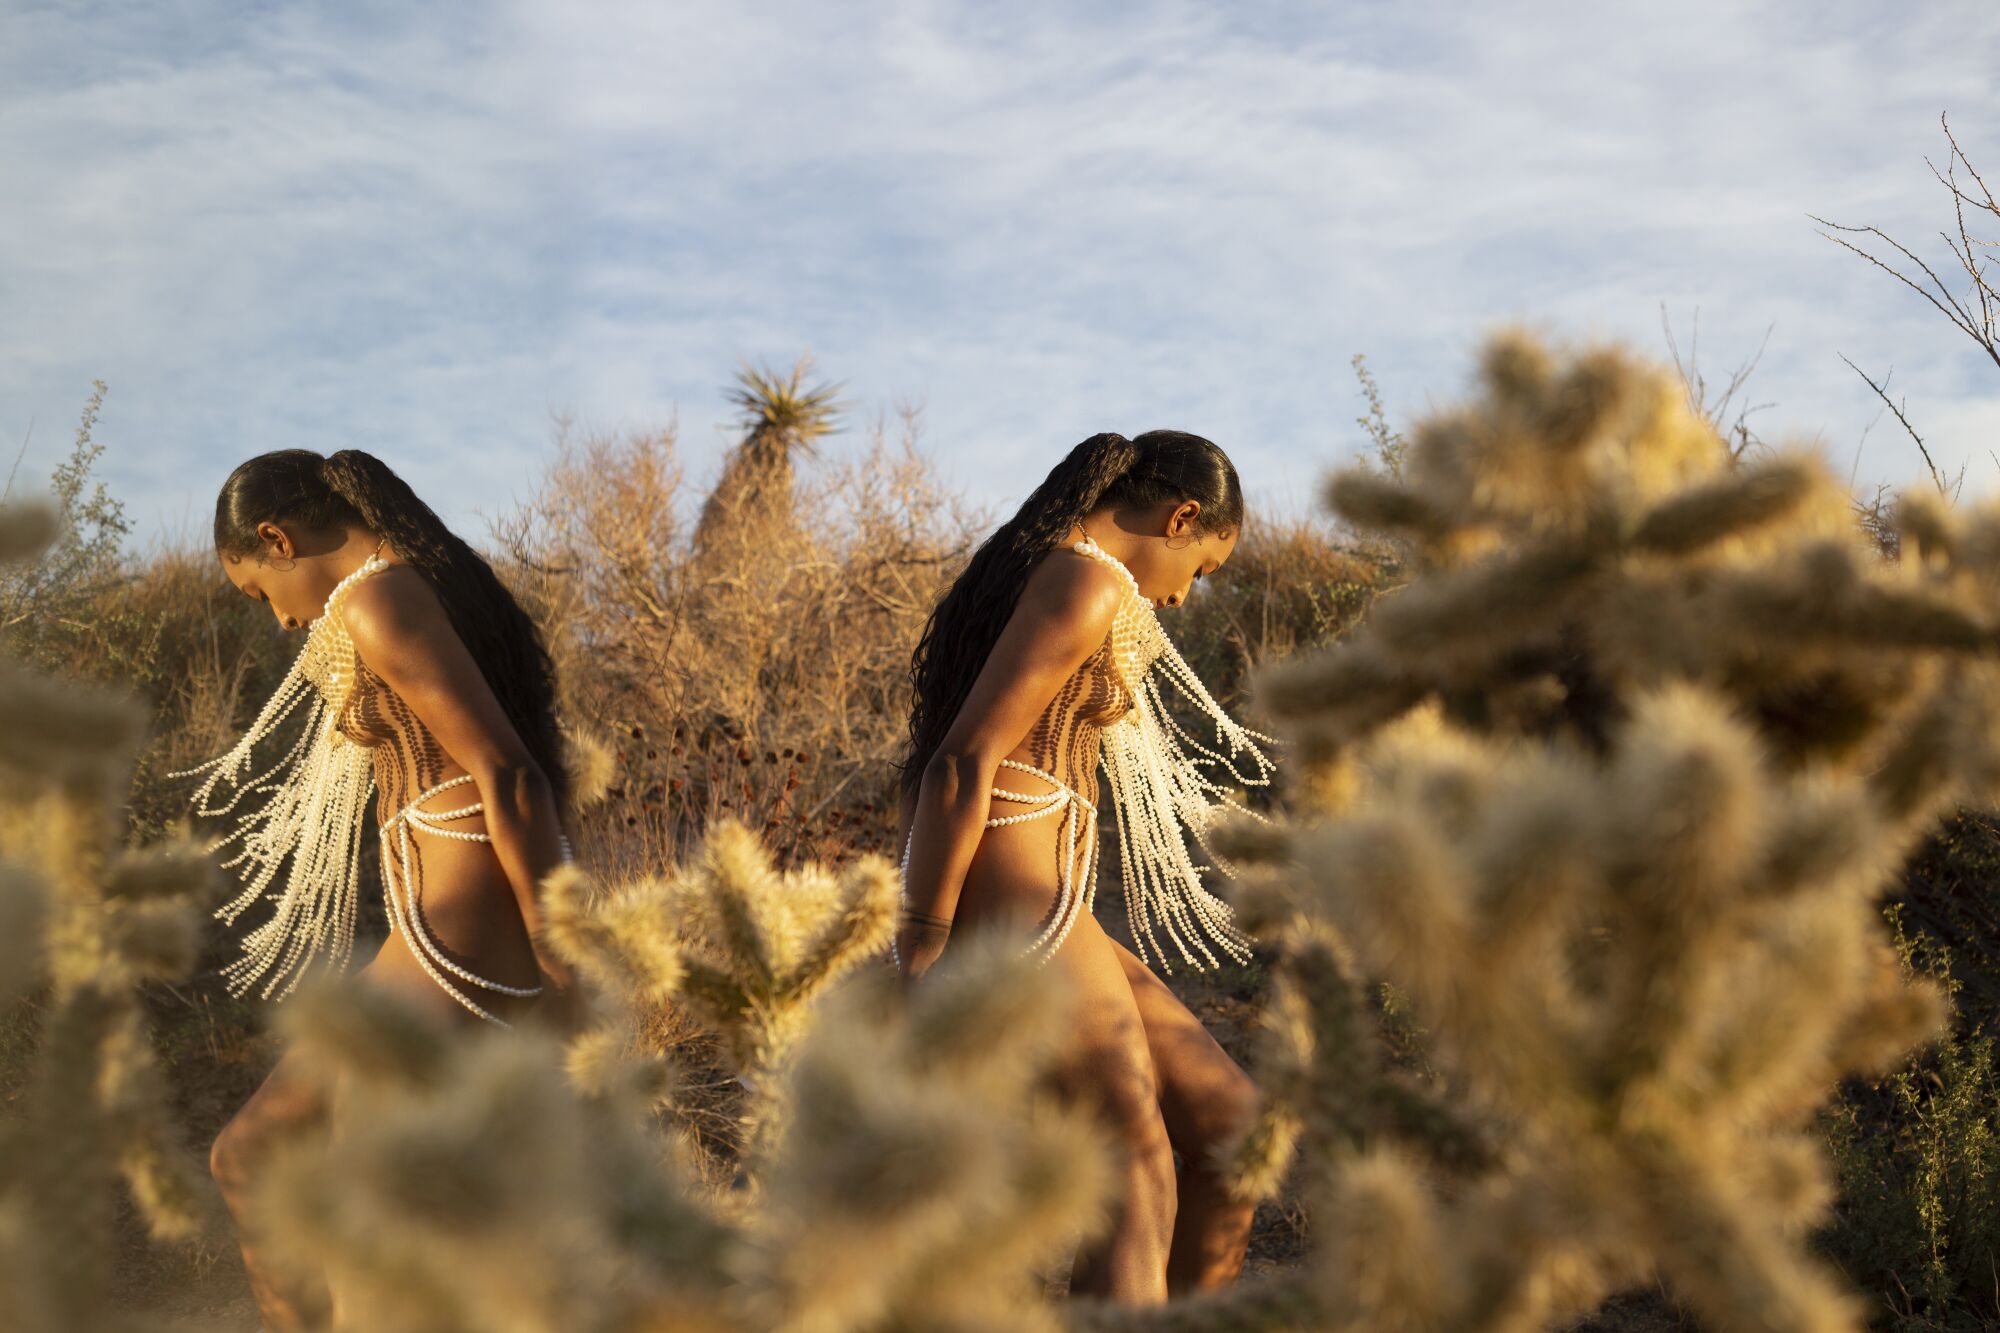 A double exposure of a scantily clad woman back to back with herself in the desert.